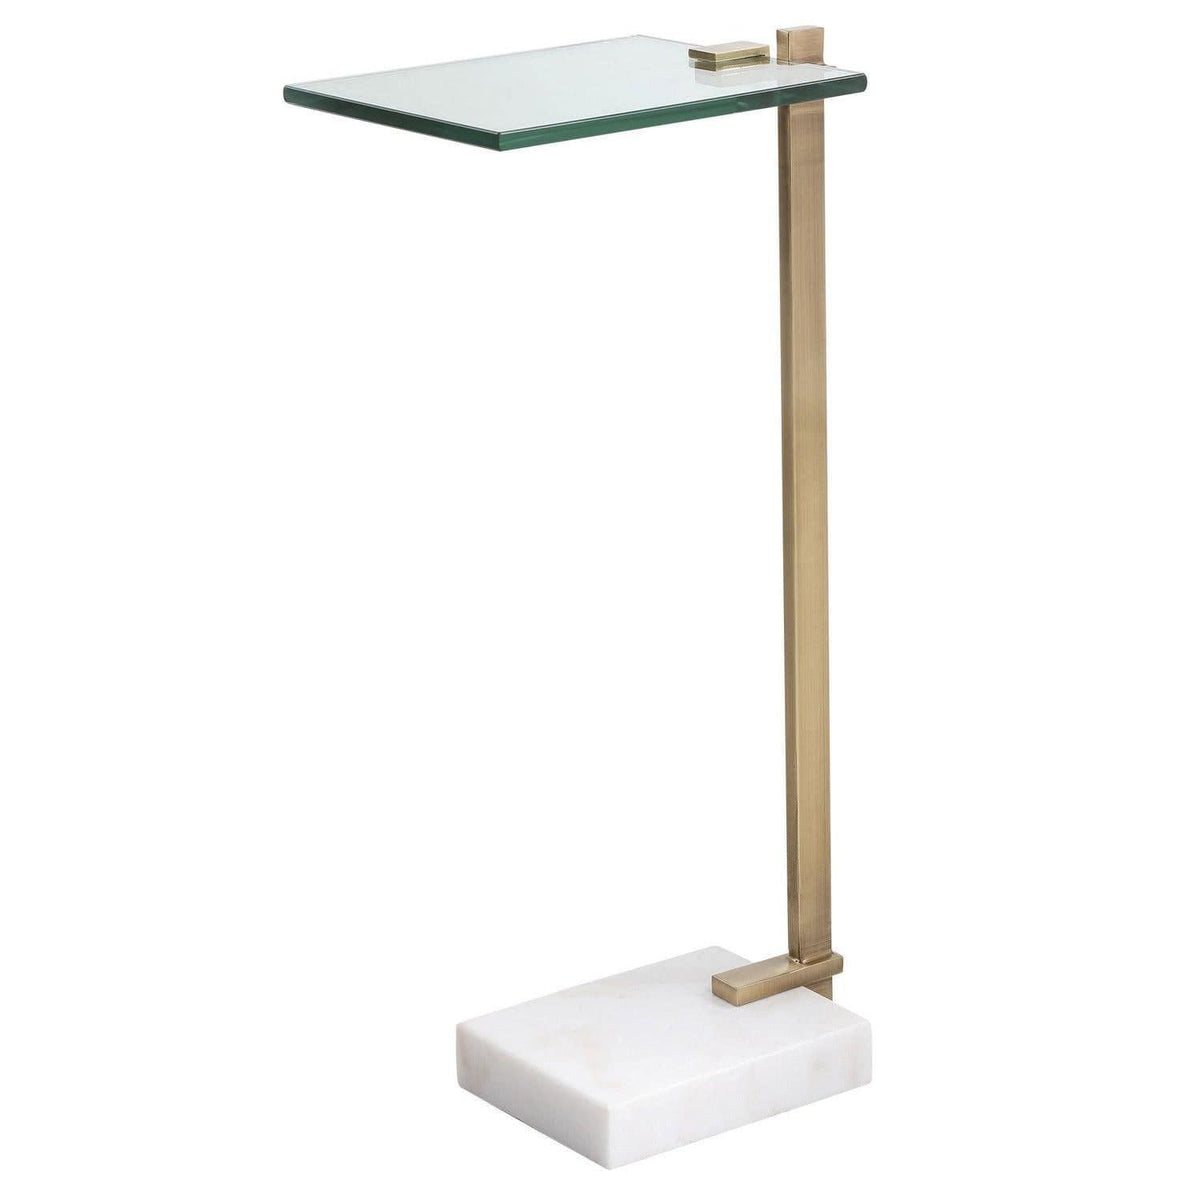 The Uttermost - Butler Accent Table - 25136 | Montreal Lighting & Hardware